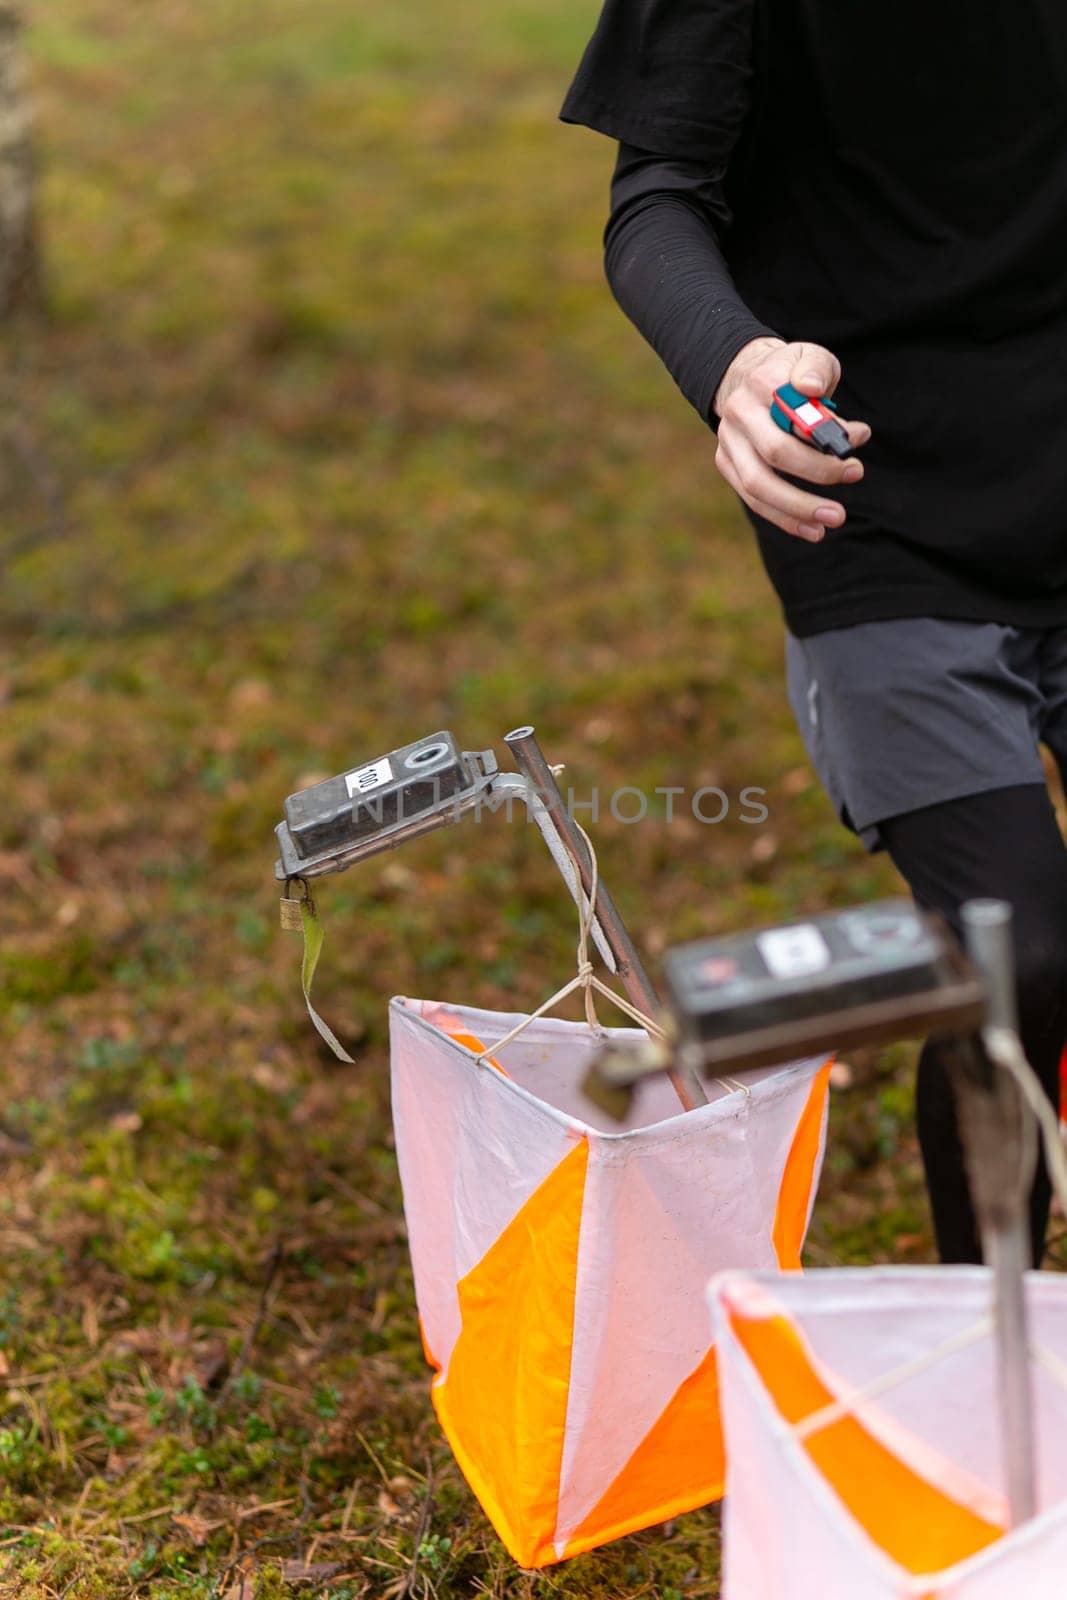 A boy punching at the orienteering control point by BY-_-BY